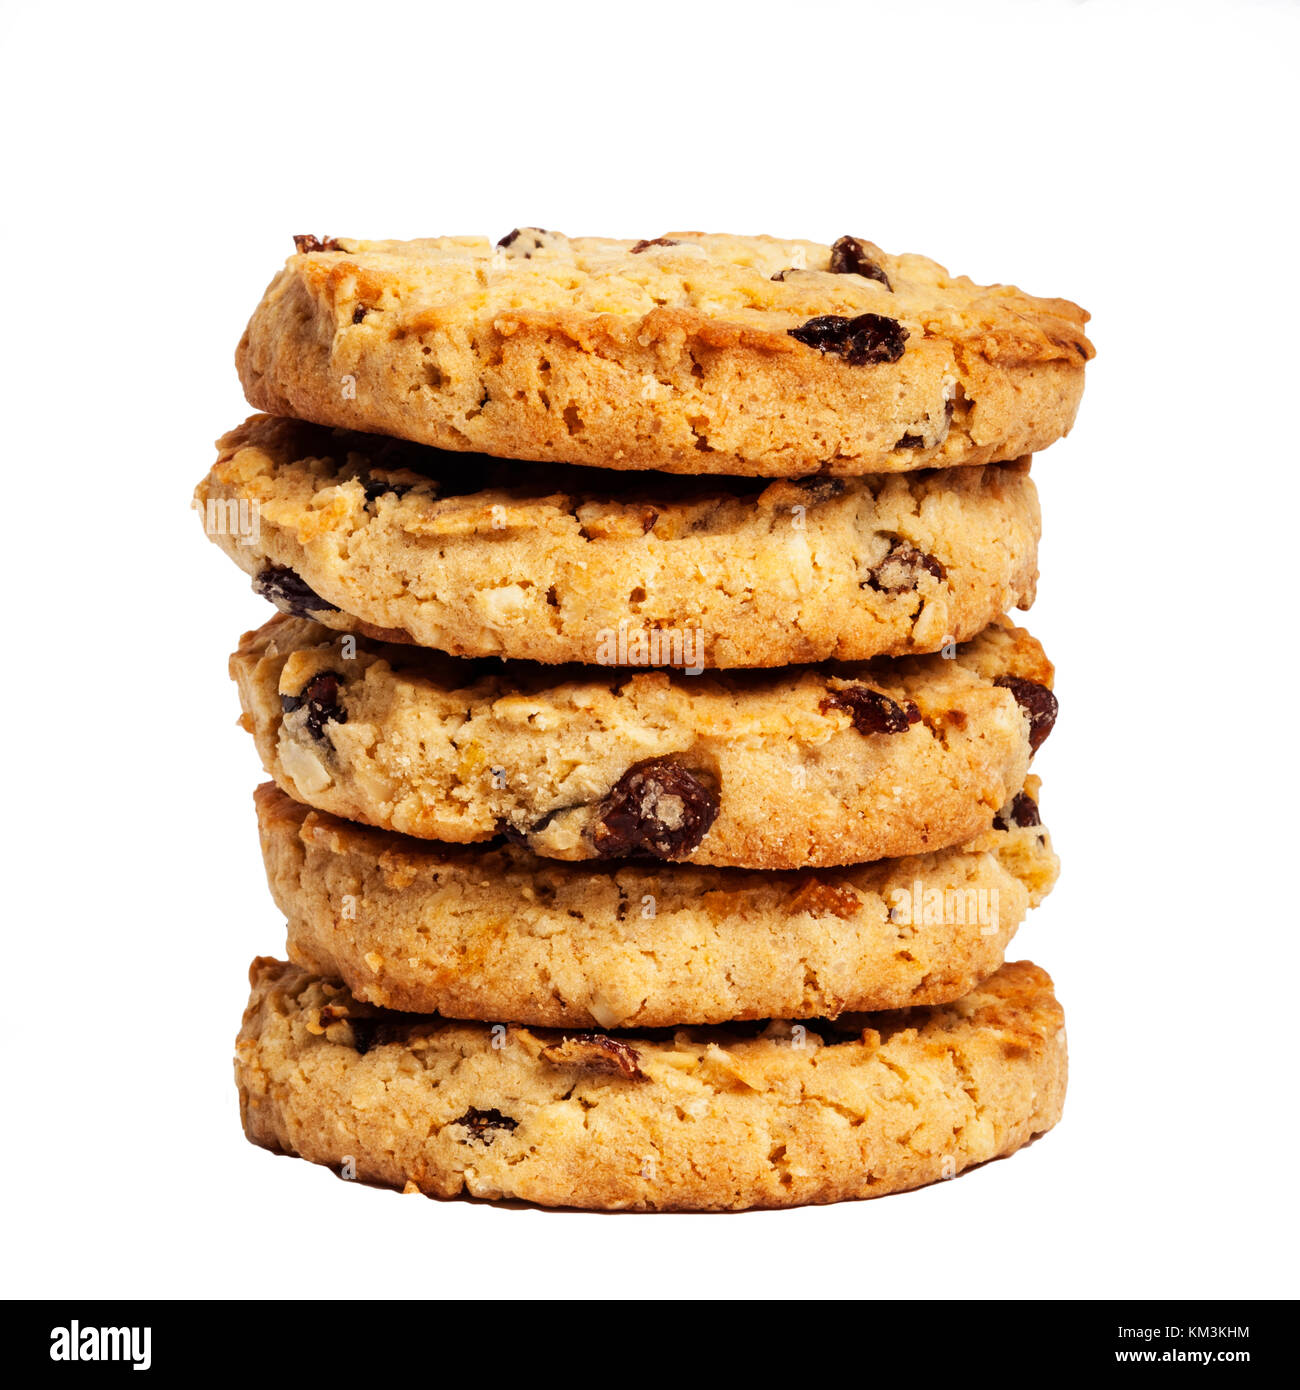 A stack of Fruit and Oat Cookies on a white background Stock Photo